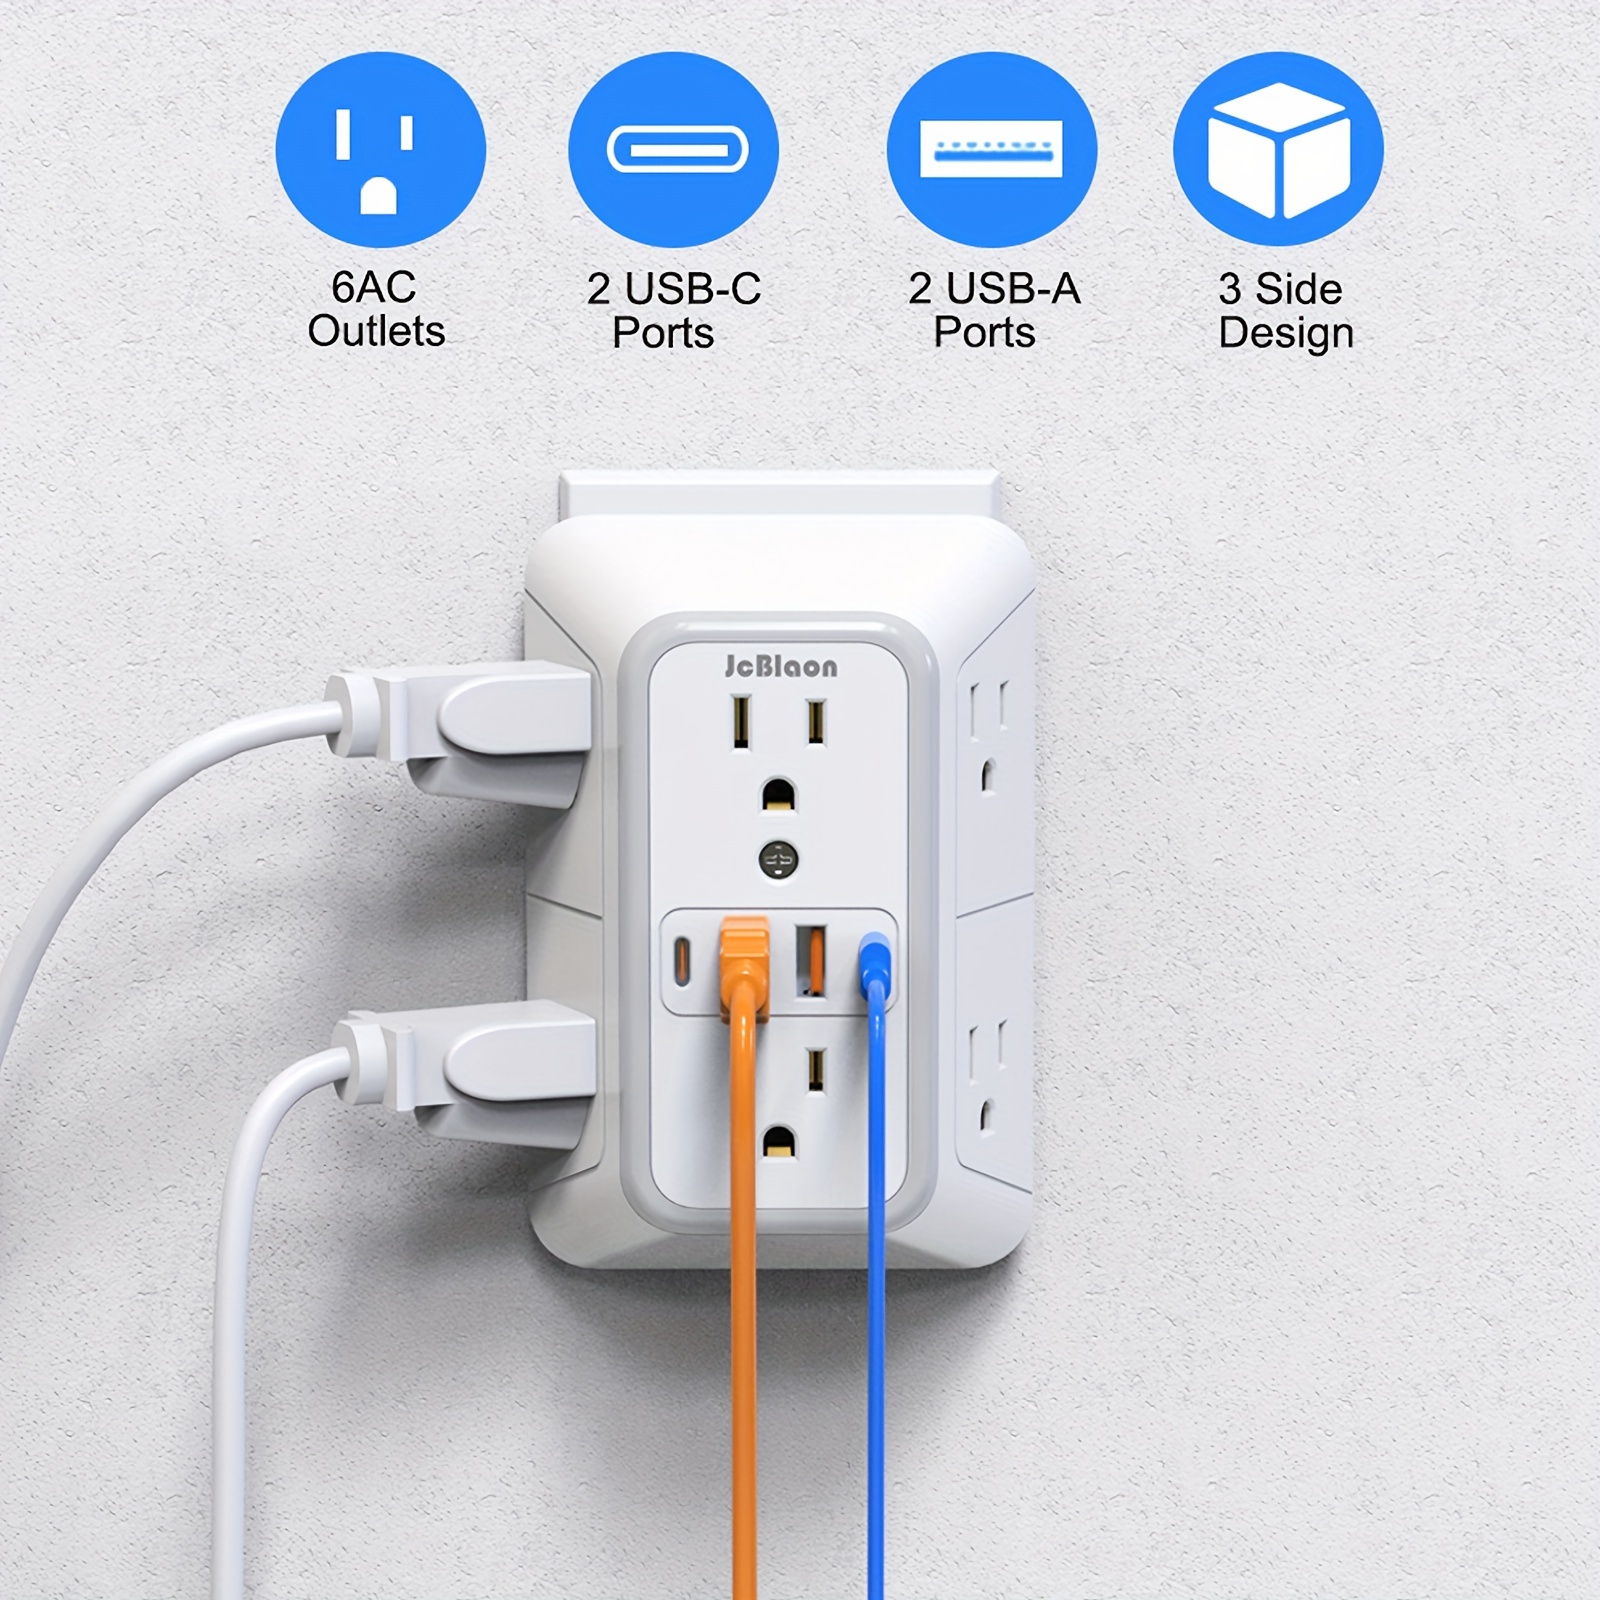 

Usb Wall Charger, Protector, 6 Outlet Extender With 4 Usb Charging Ports (2a2c) 3-sided 1050j Power Strip Multi Plug Outlets Wall Adapter Spaced For Home Travel Office